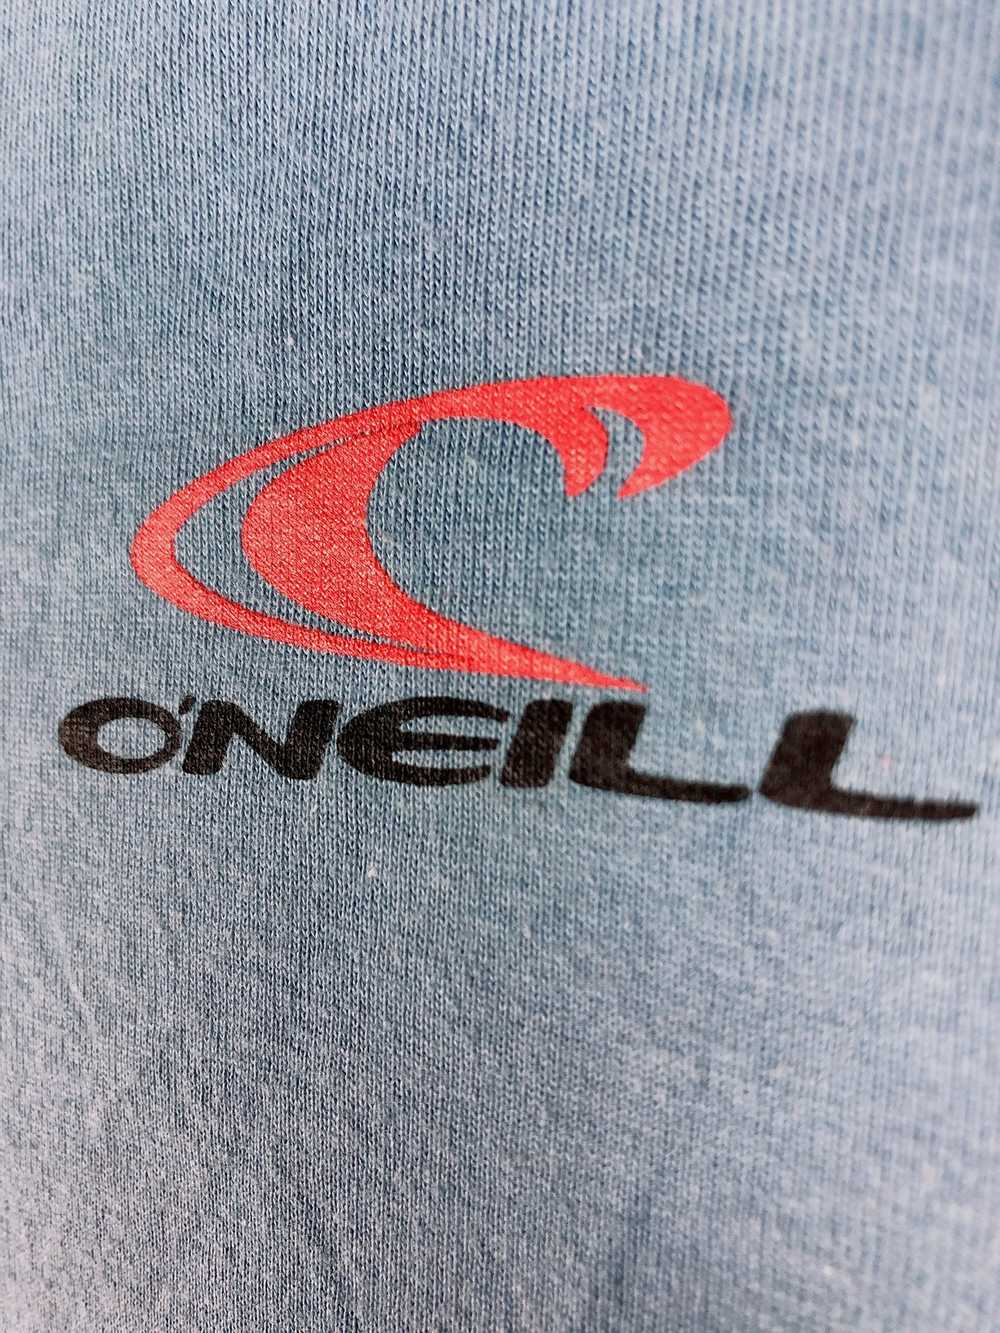 Oneill × Streetwear × Surf Style Vintage ONEILL S… - image 2